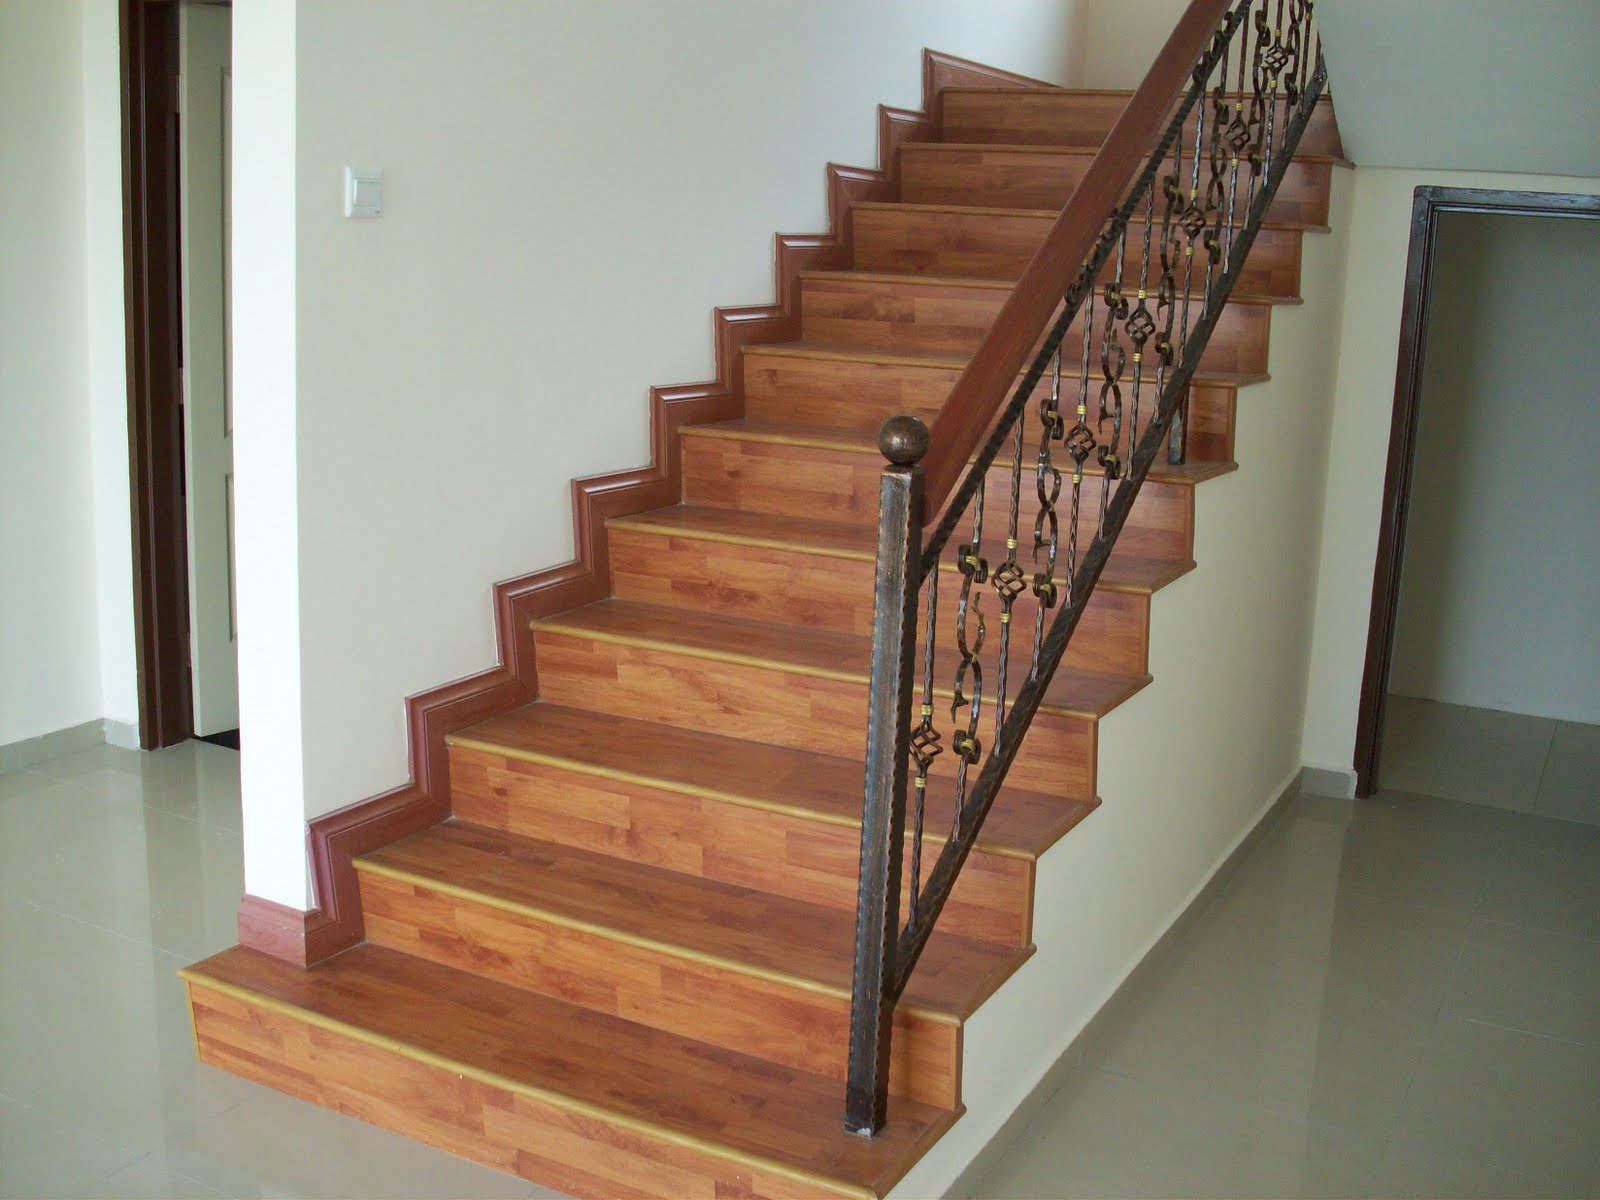 How To Install Wood Flooring On Stairs, Flooring On Stairs Ideas